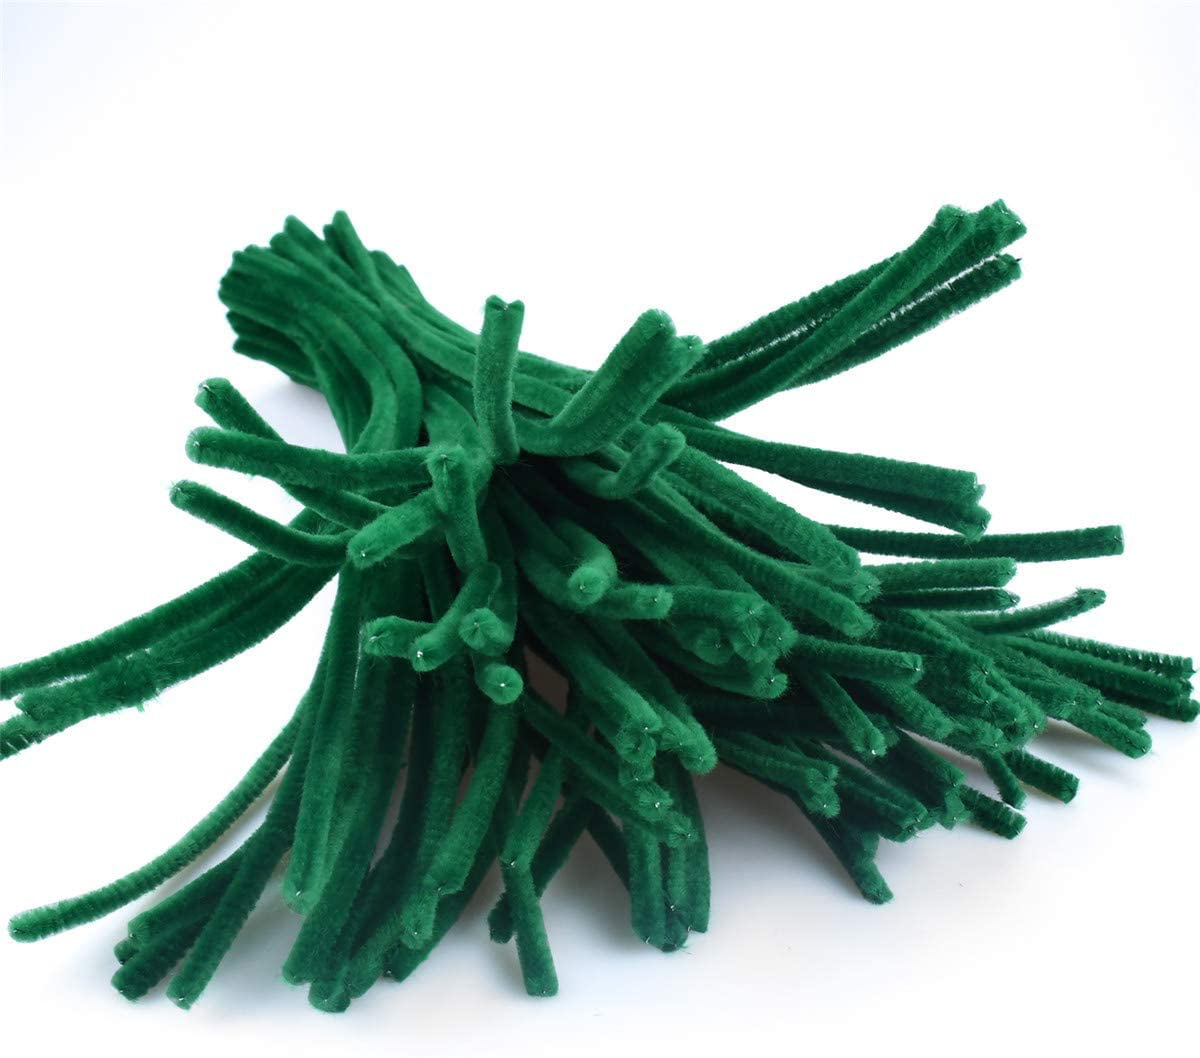 TOCOLES Pipe Cleaners Craft Supplies - 100pcs Dark Green Pipecleaners Craft Kids DIY Art Supplies, Pipe Cleaner Chenille Stems, Dark Green Pipe Cleaners Bulk